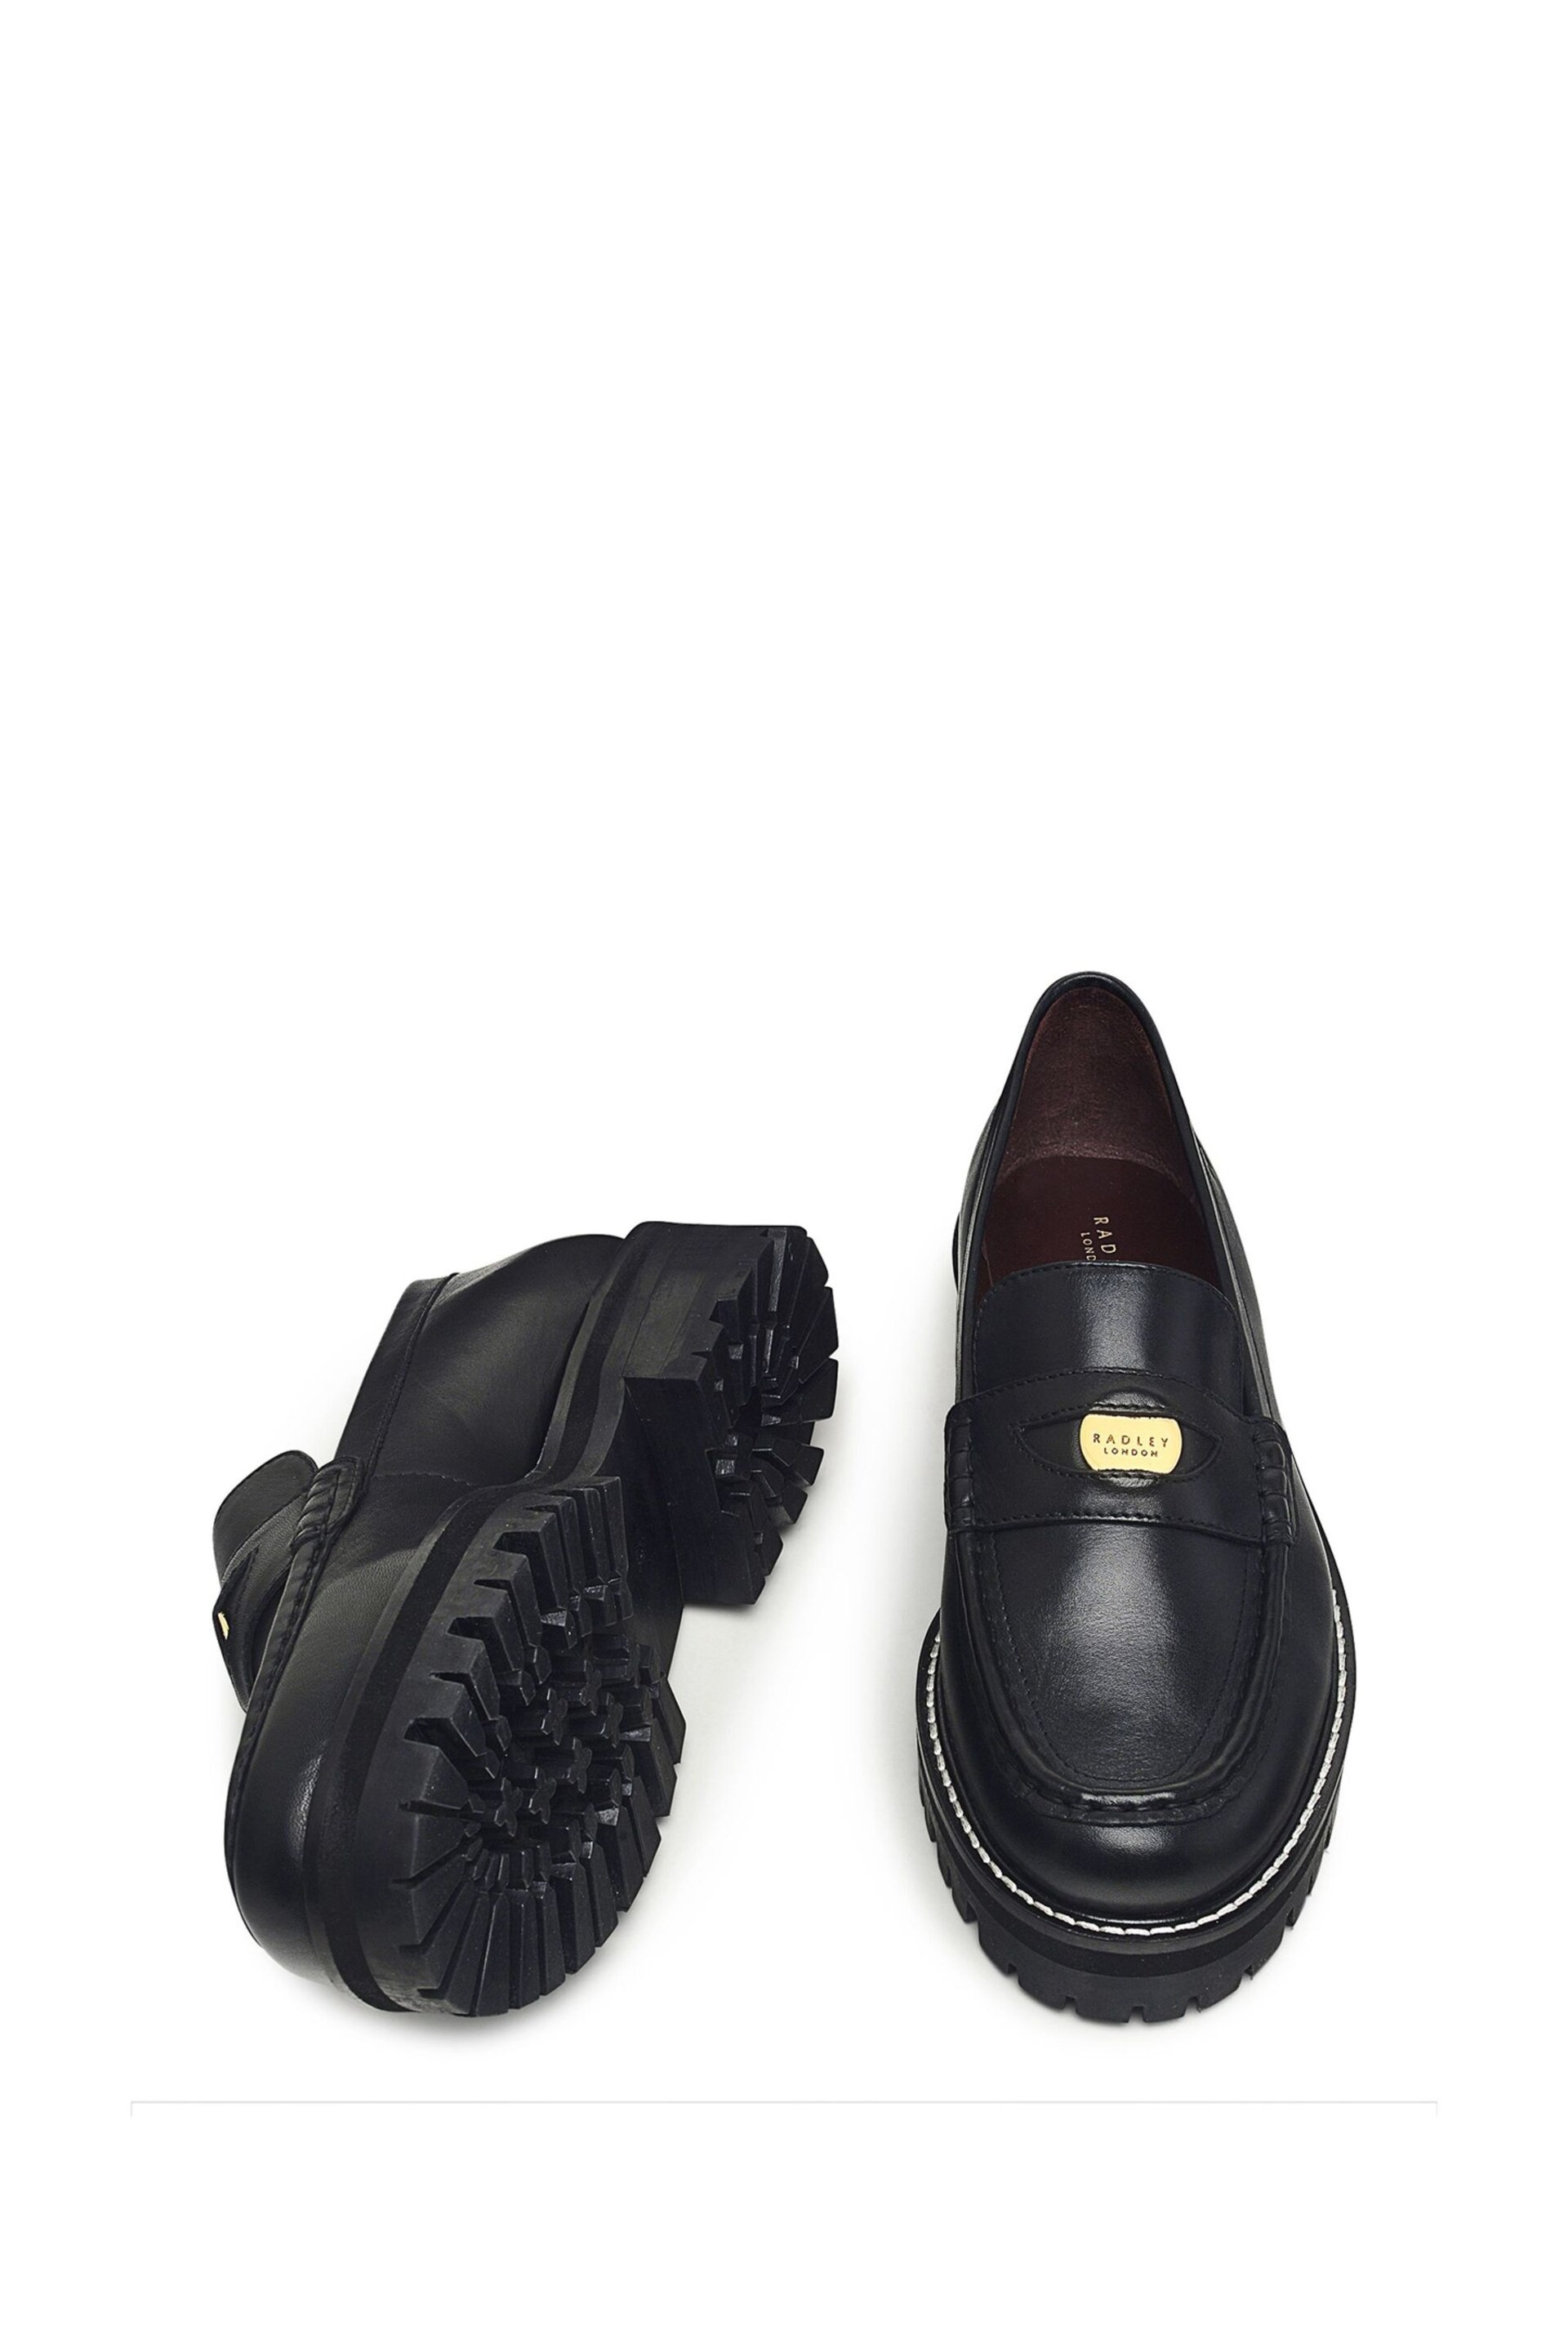 Radley London Thistle Grove Chunky Penny Black Loafers - Image 3 of 3